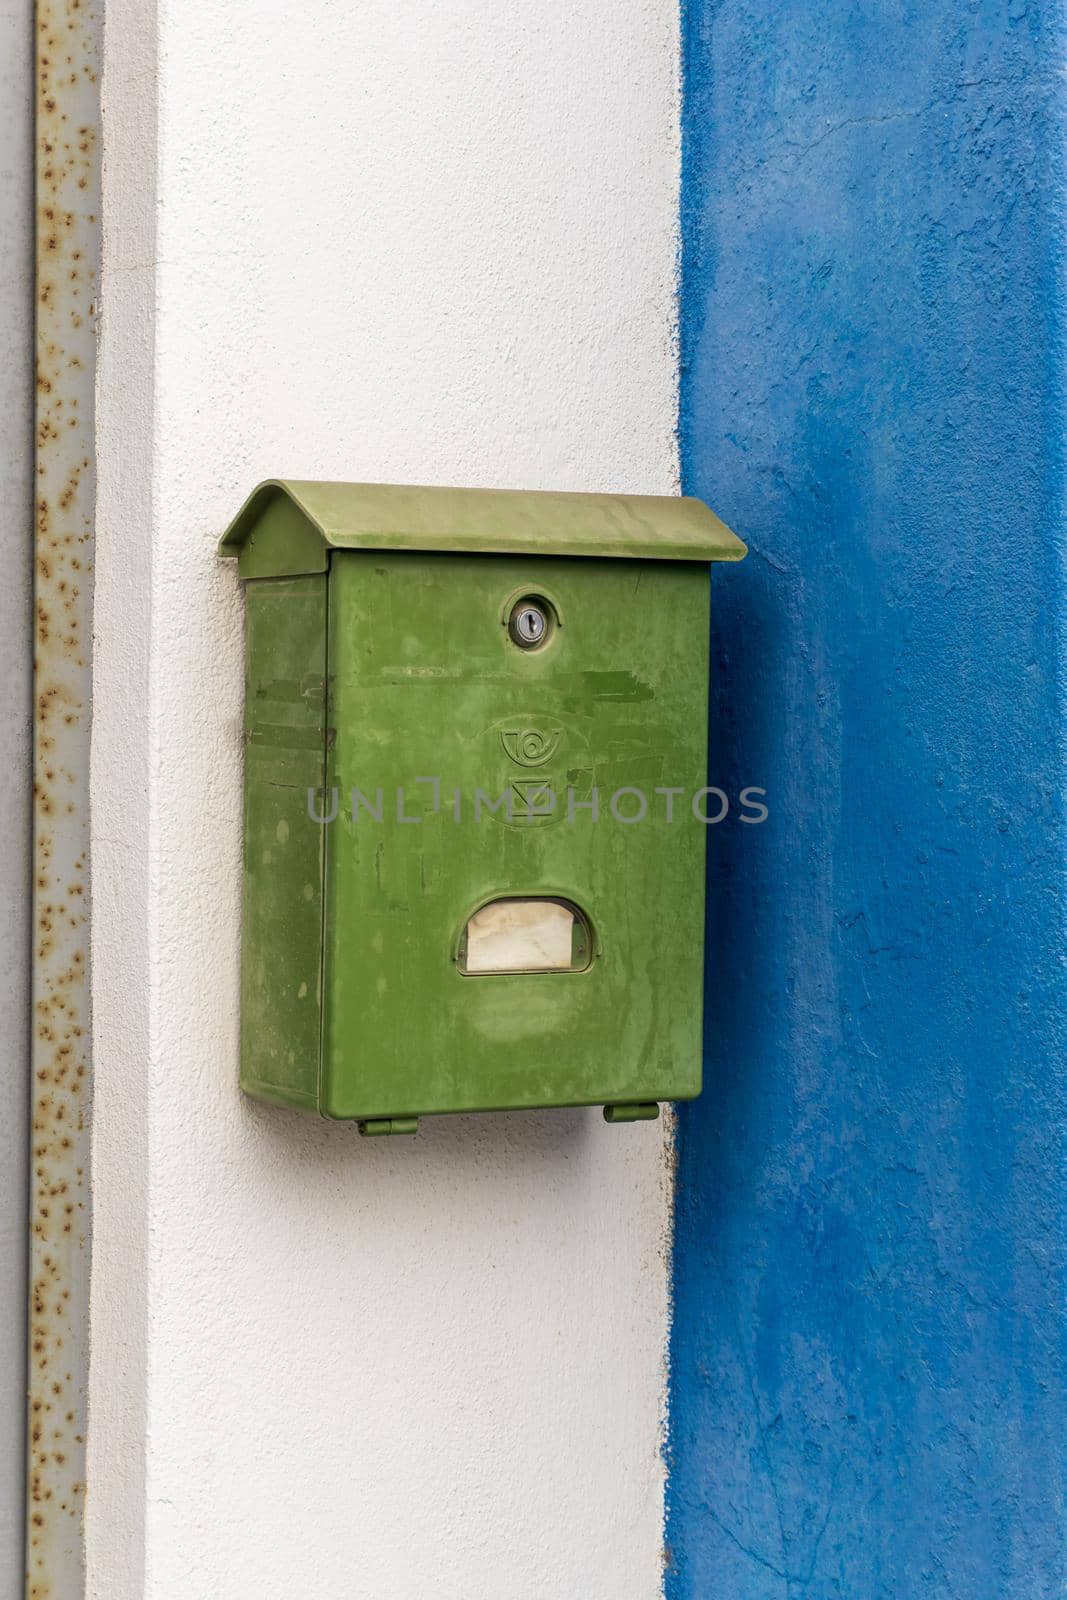 Old green mailbox on the white and blue wall of the house close up